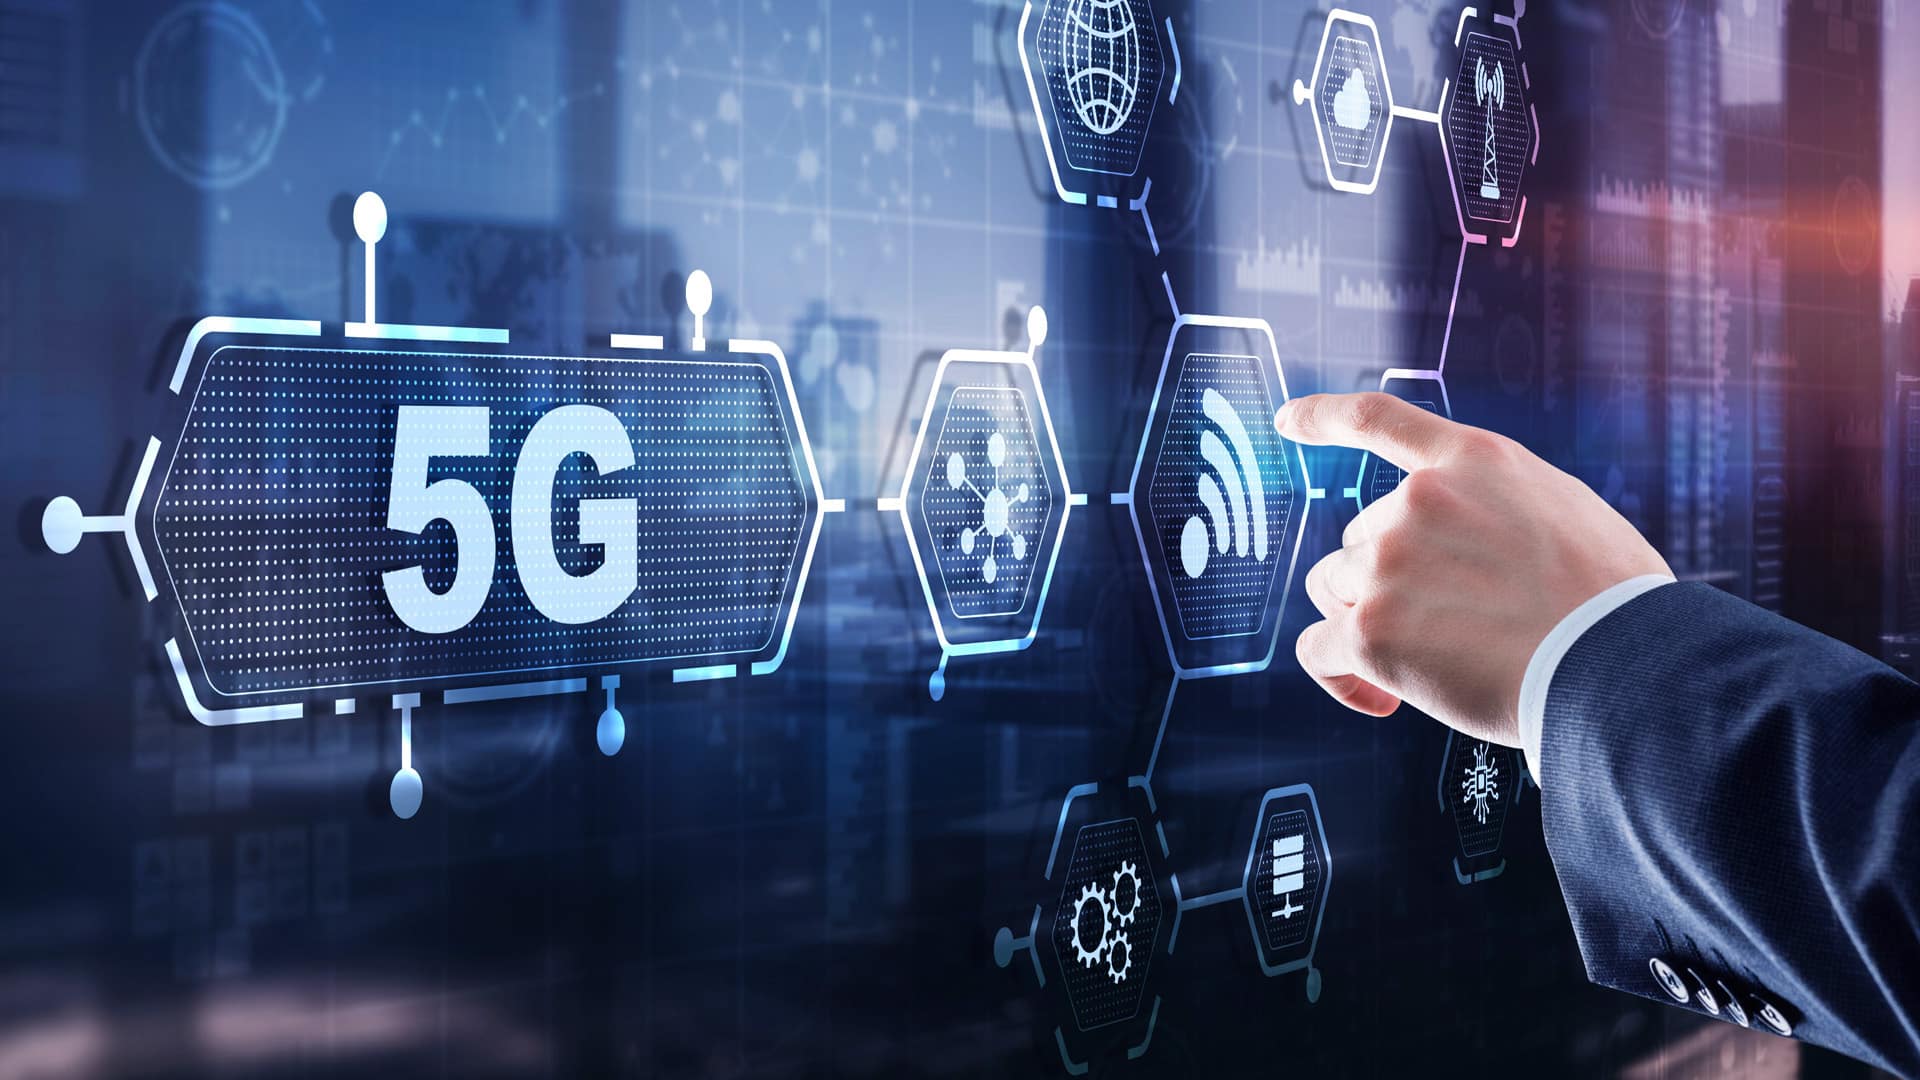 No biz case for 5G roll-out if concerns on private captive networks not addressed: Telcos' body